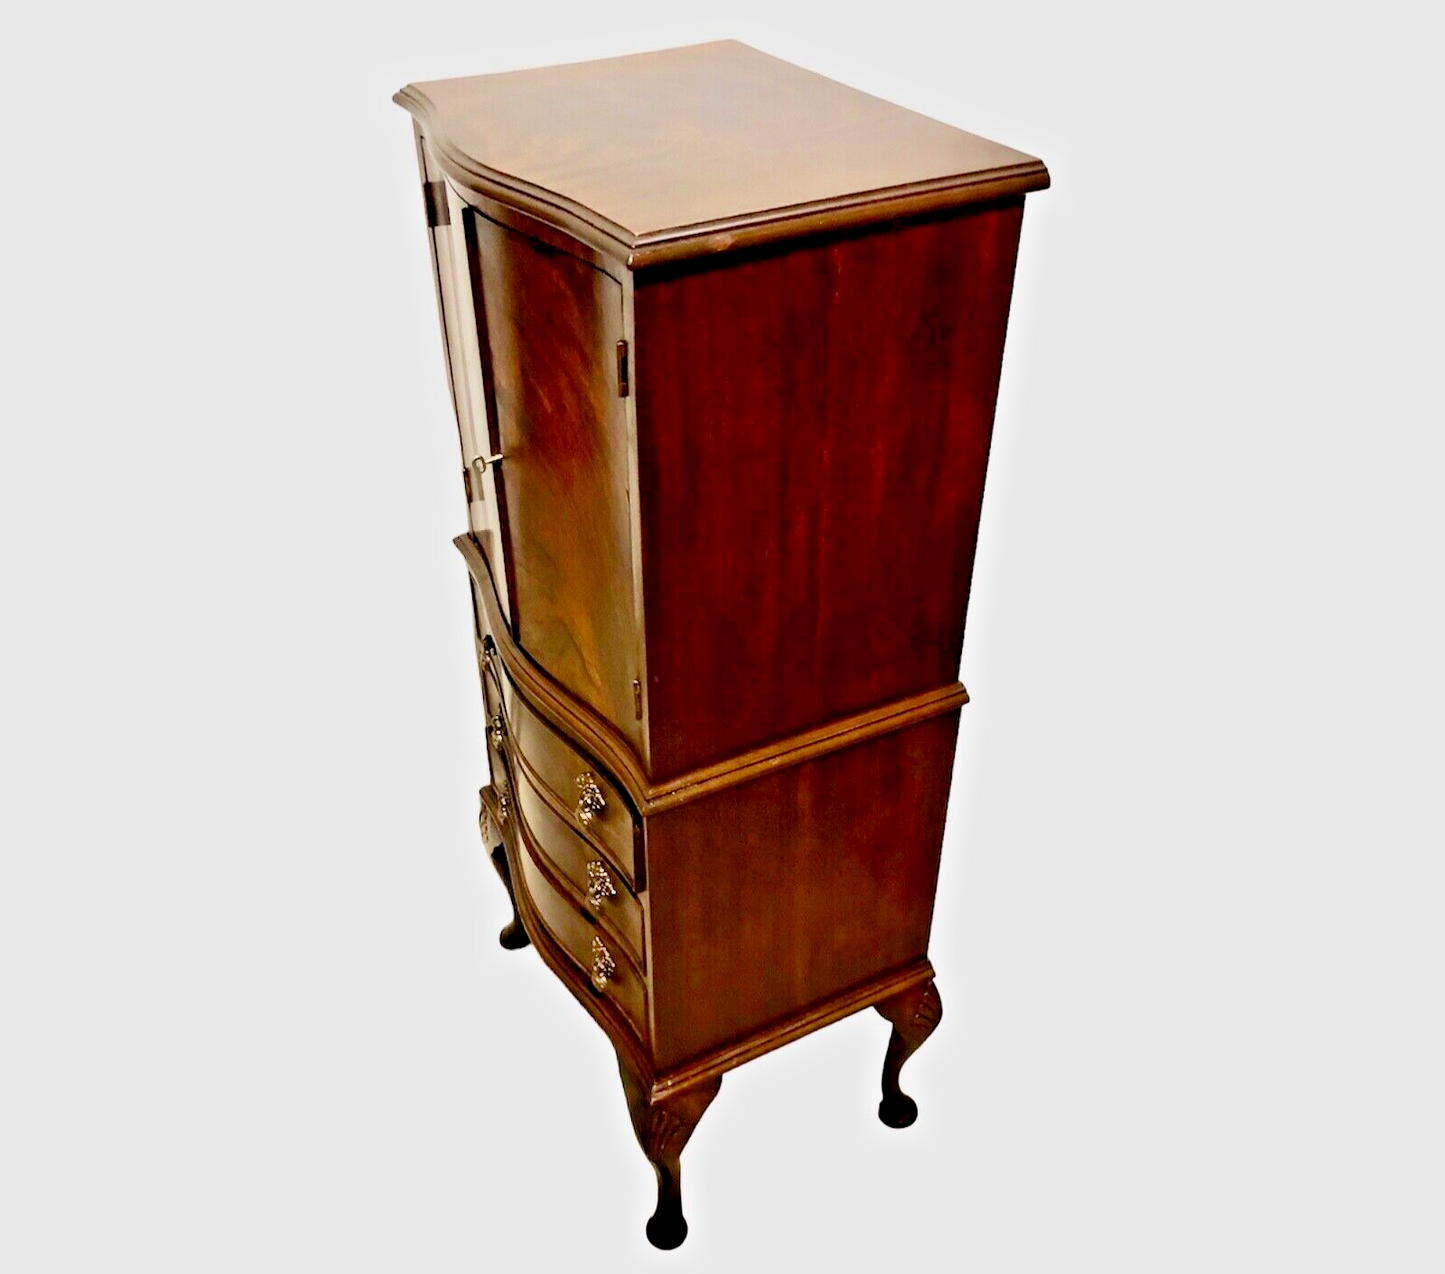 000794....Handsome Vintage Mahogany Drinks Cabinet With Drawers